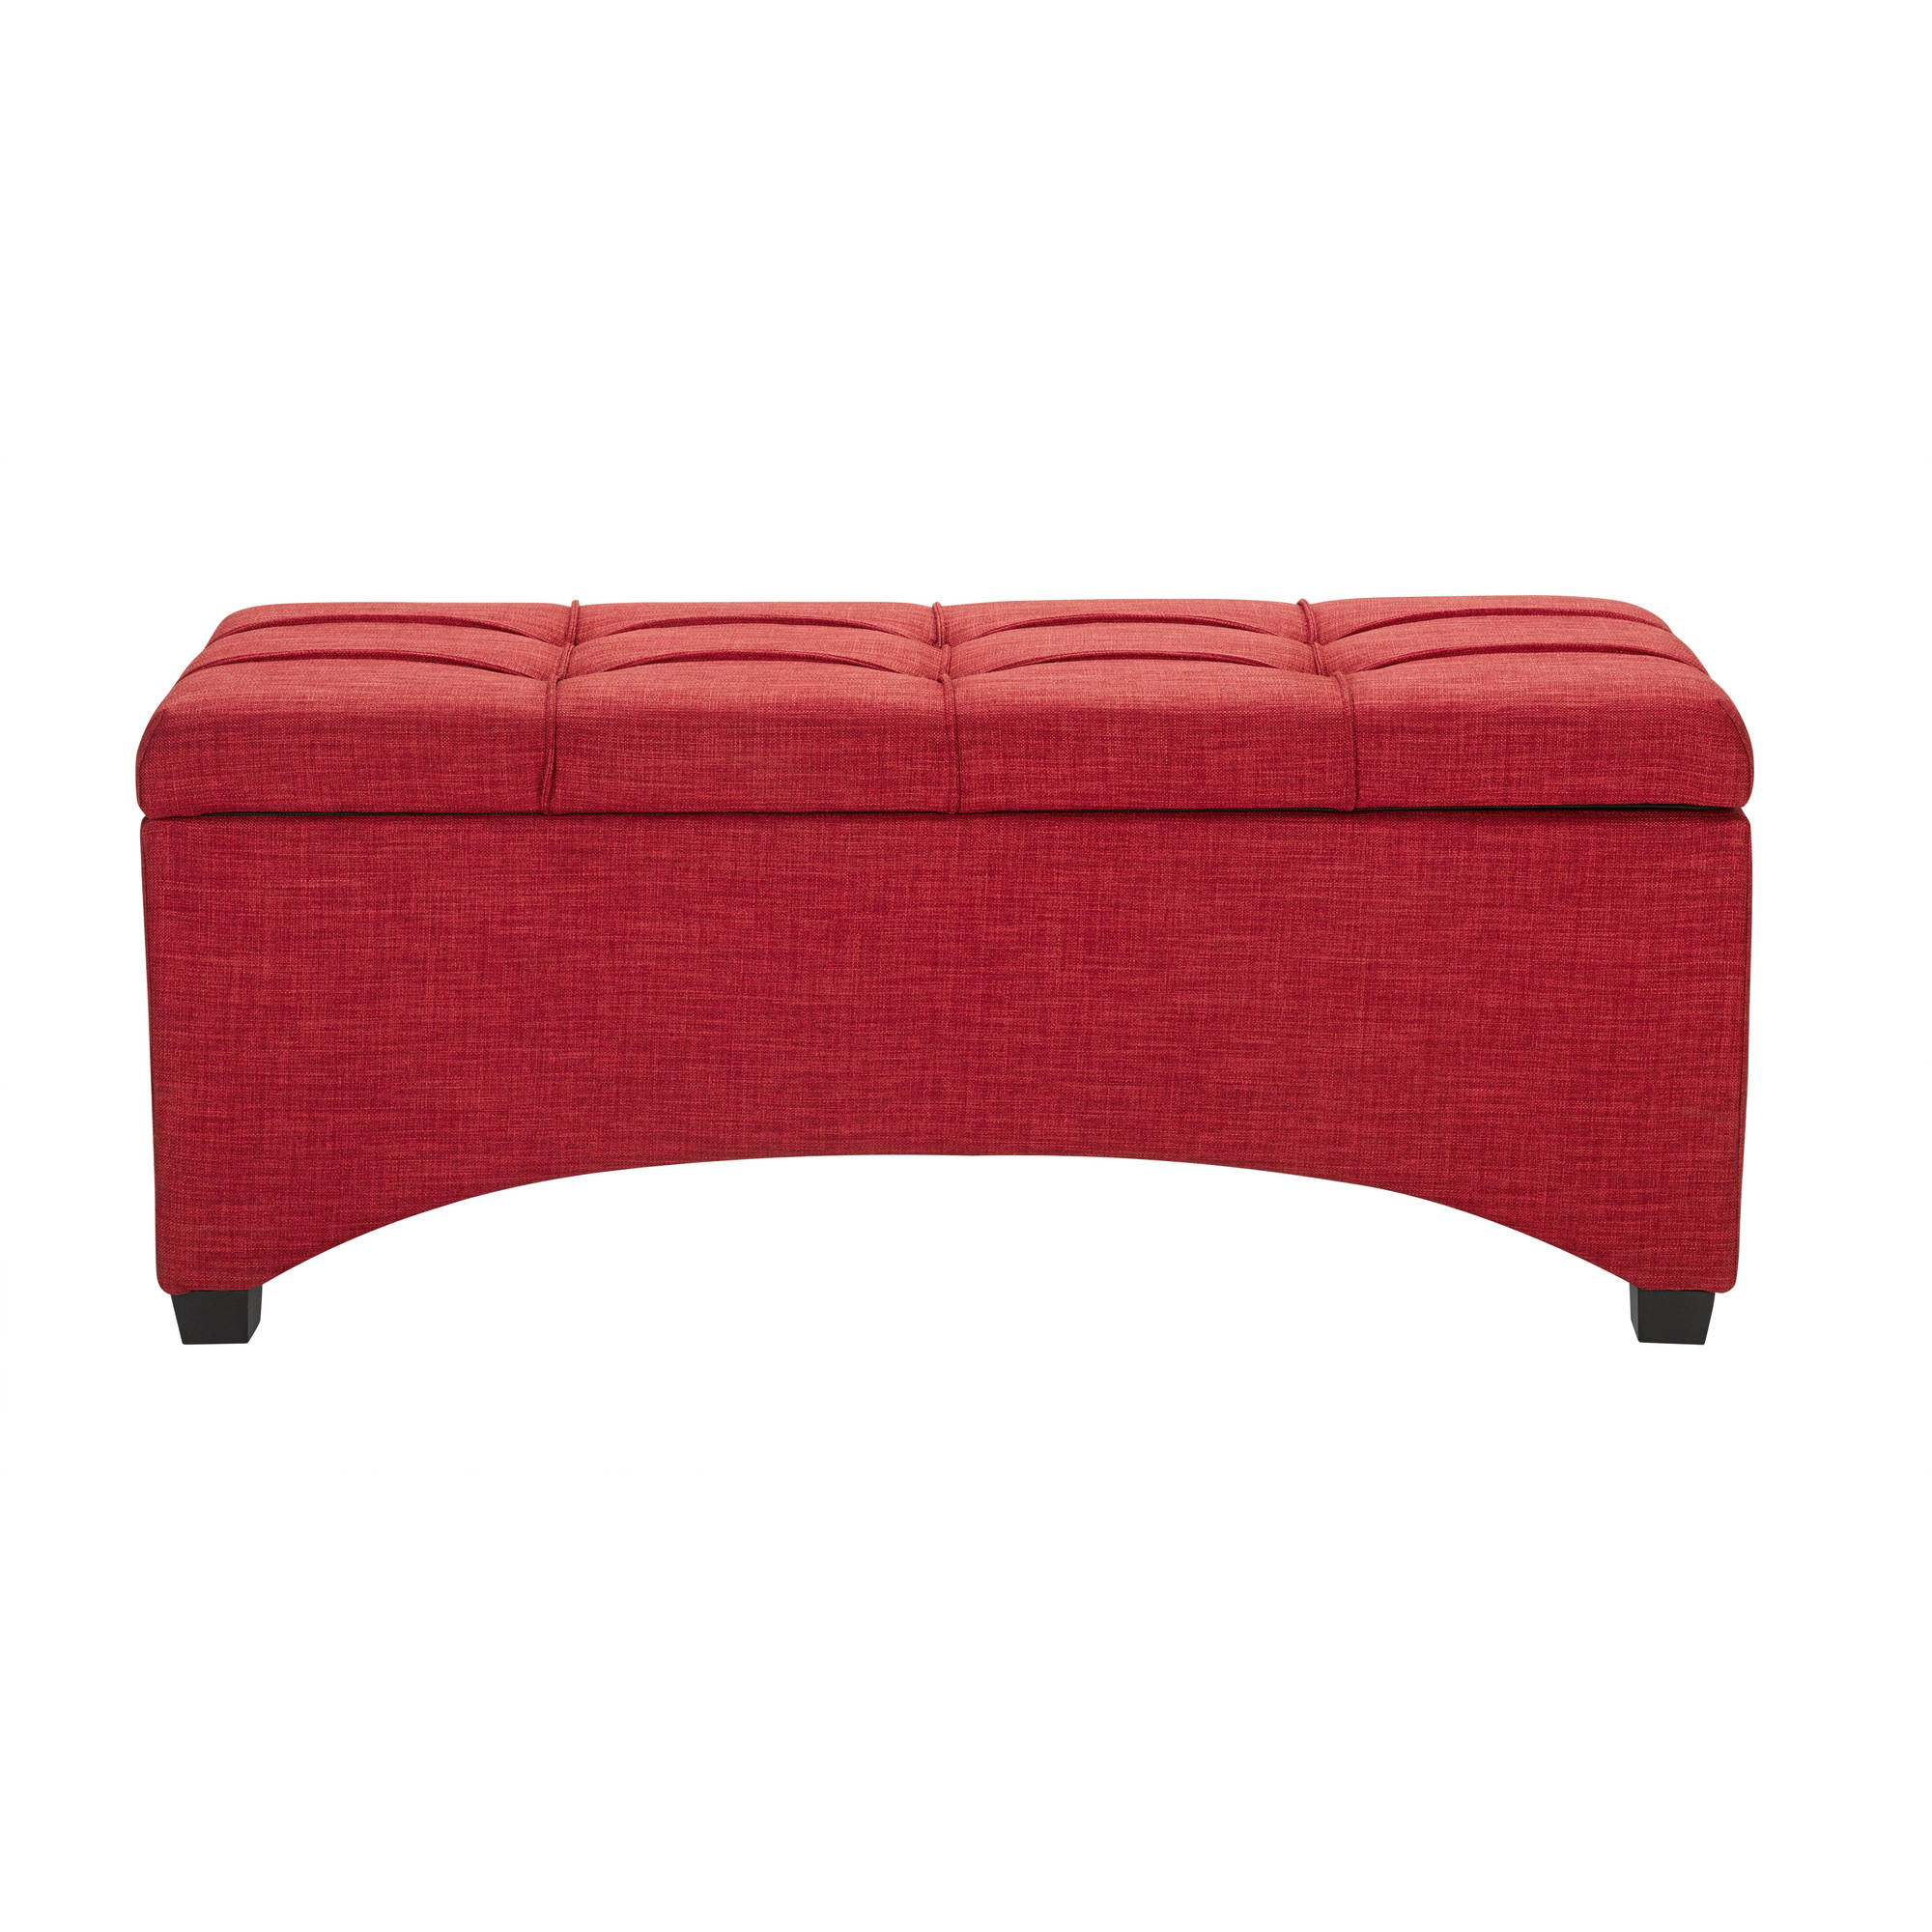 Better Homes & Gardens Pintucked Storage Bench, Red - image 3 of 5